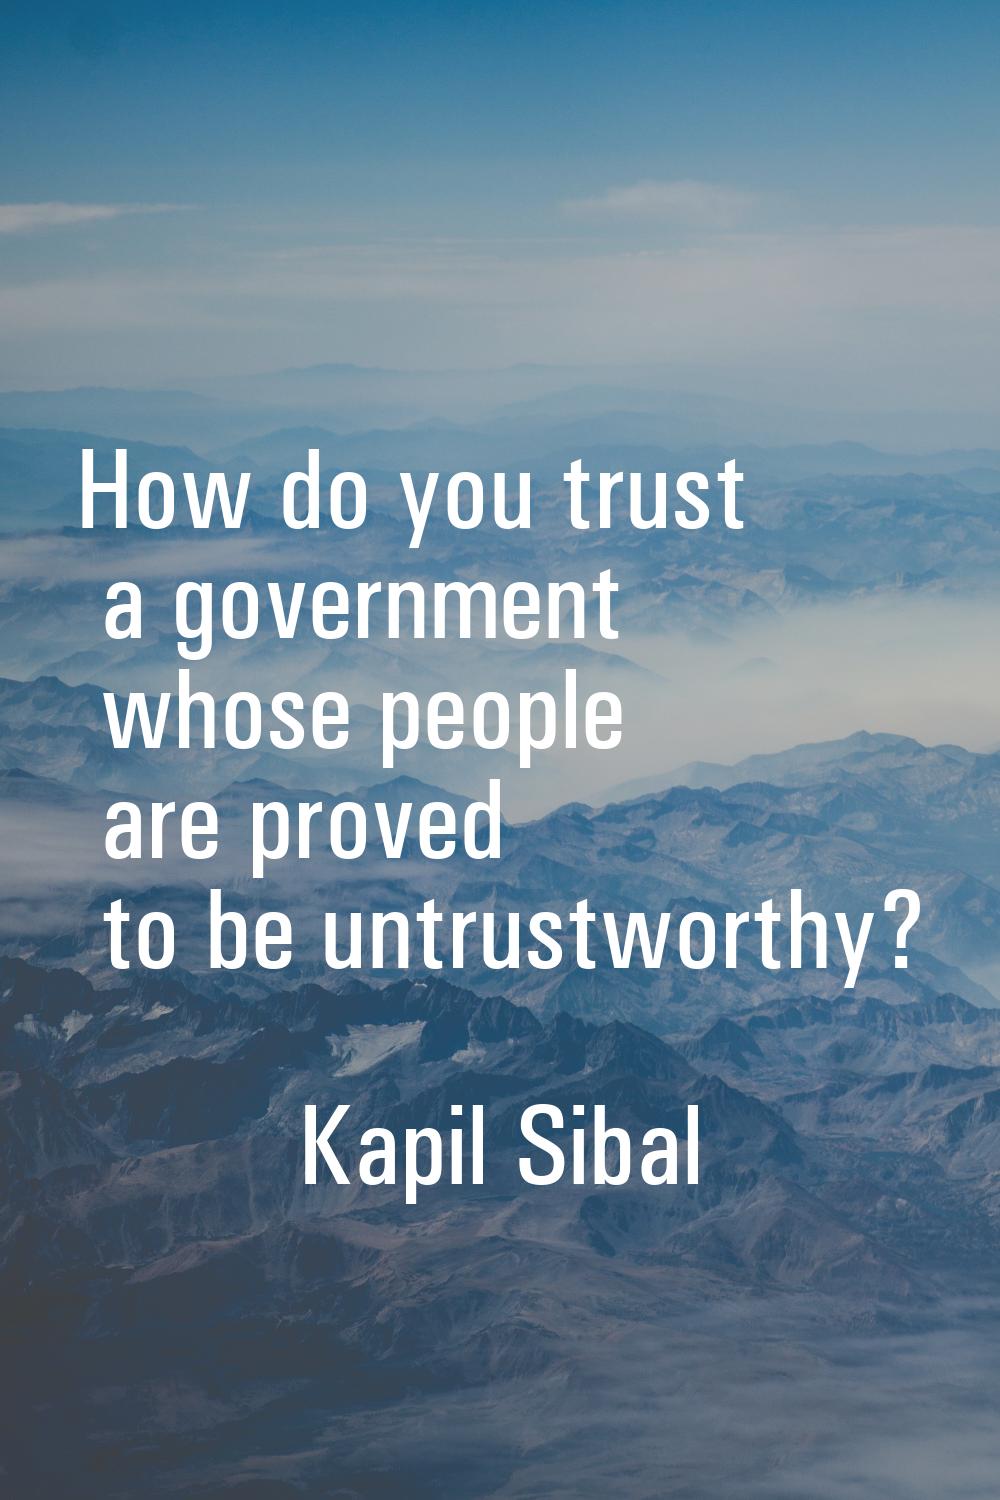 How do you trust a government whose people are proved to be untrustworthy?